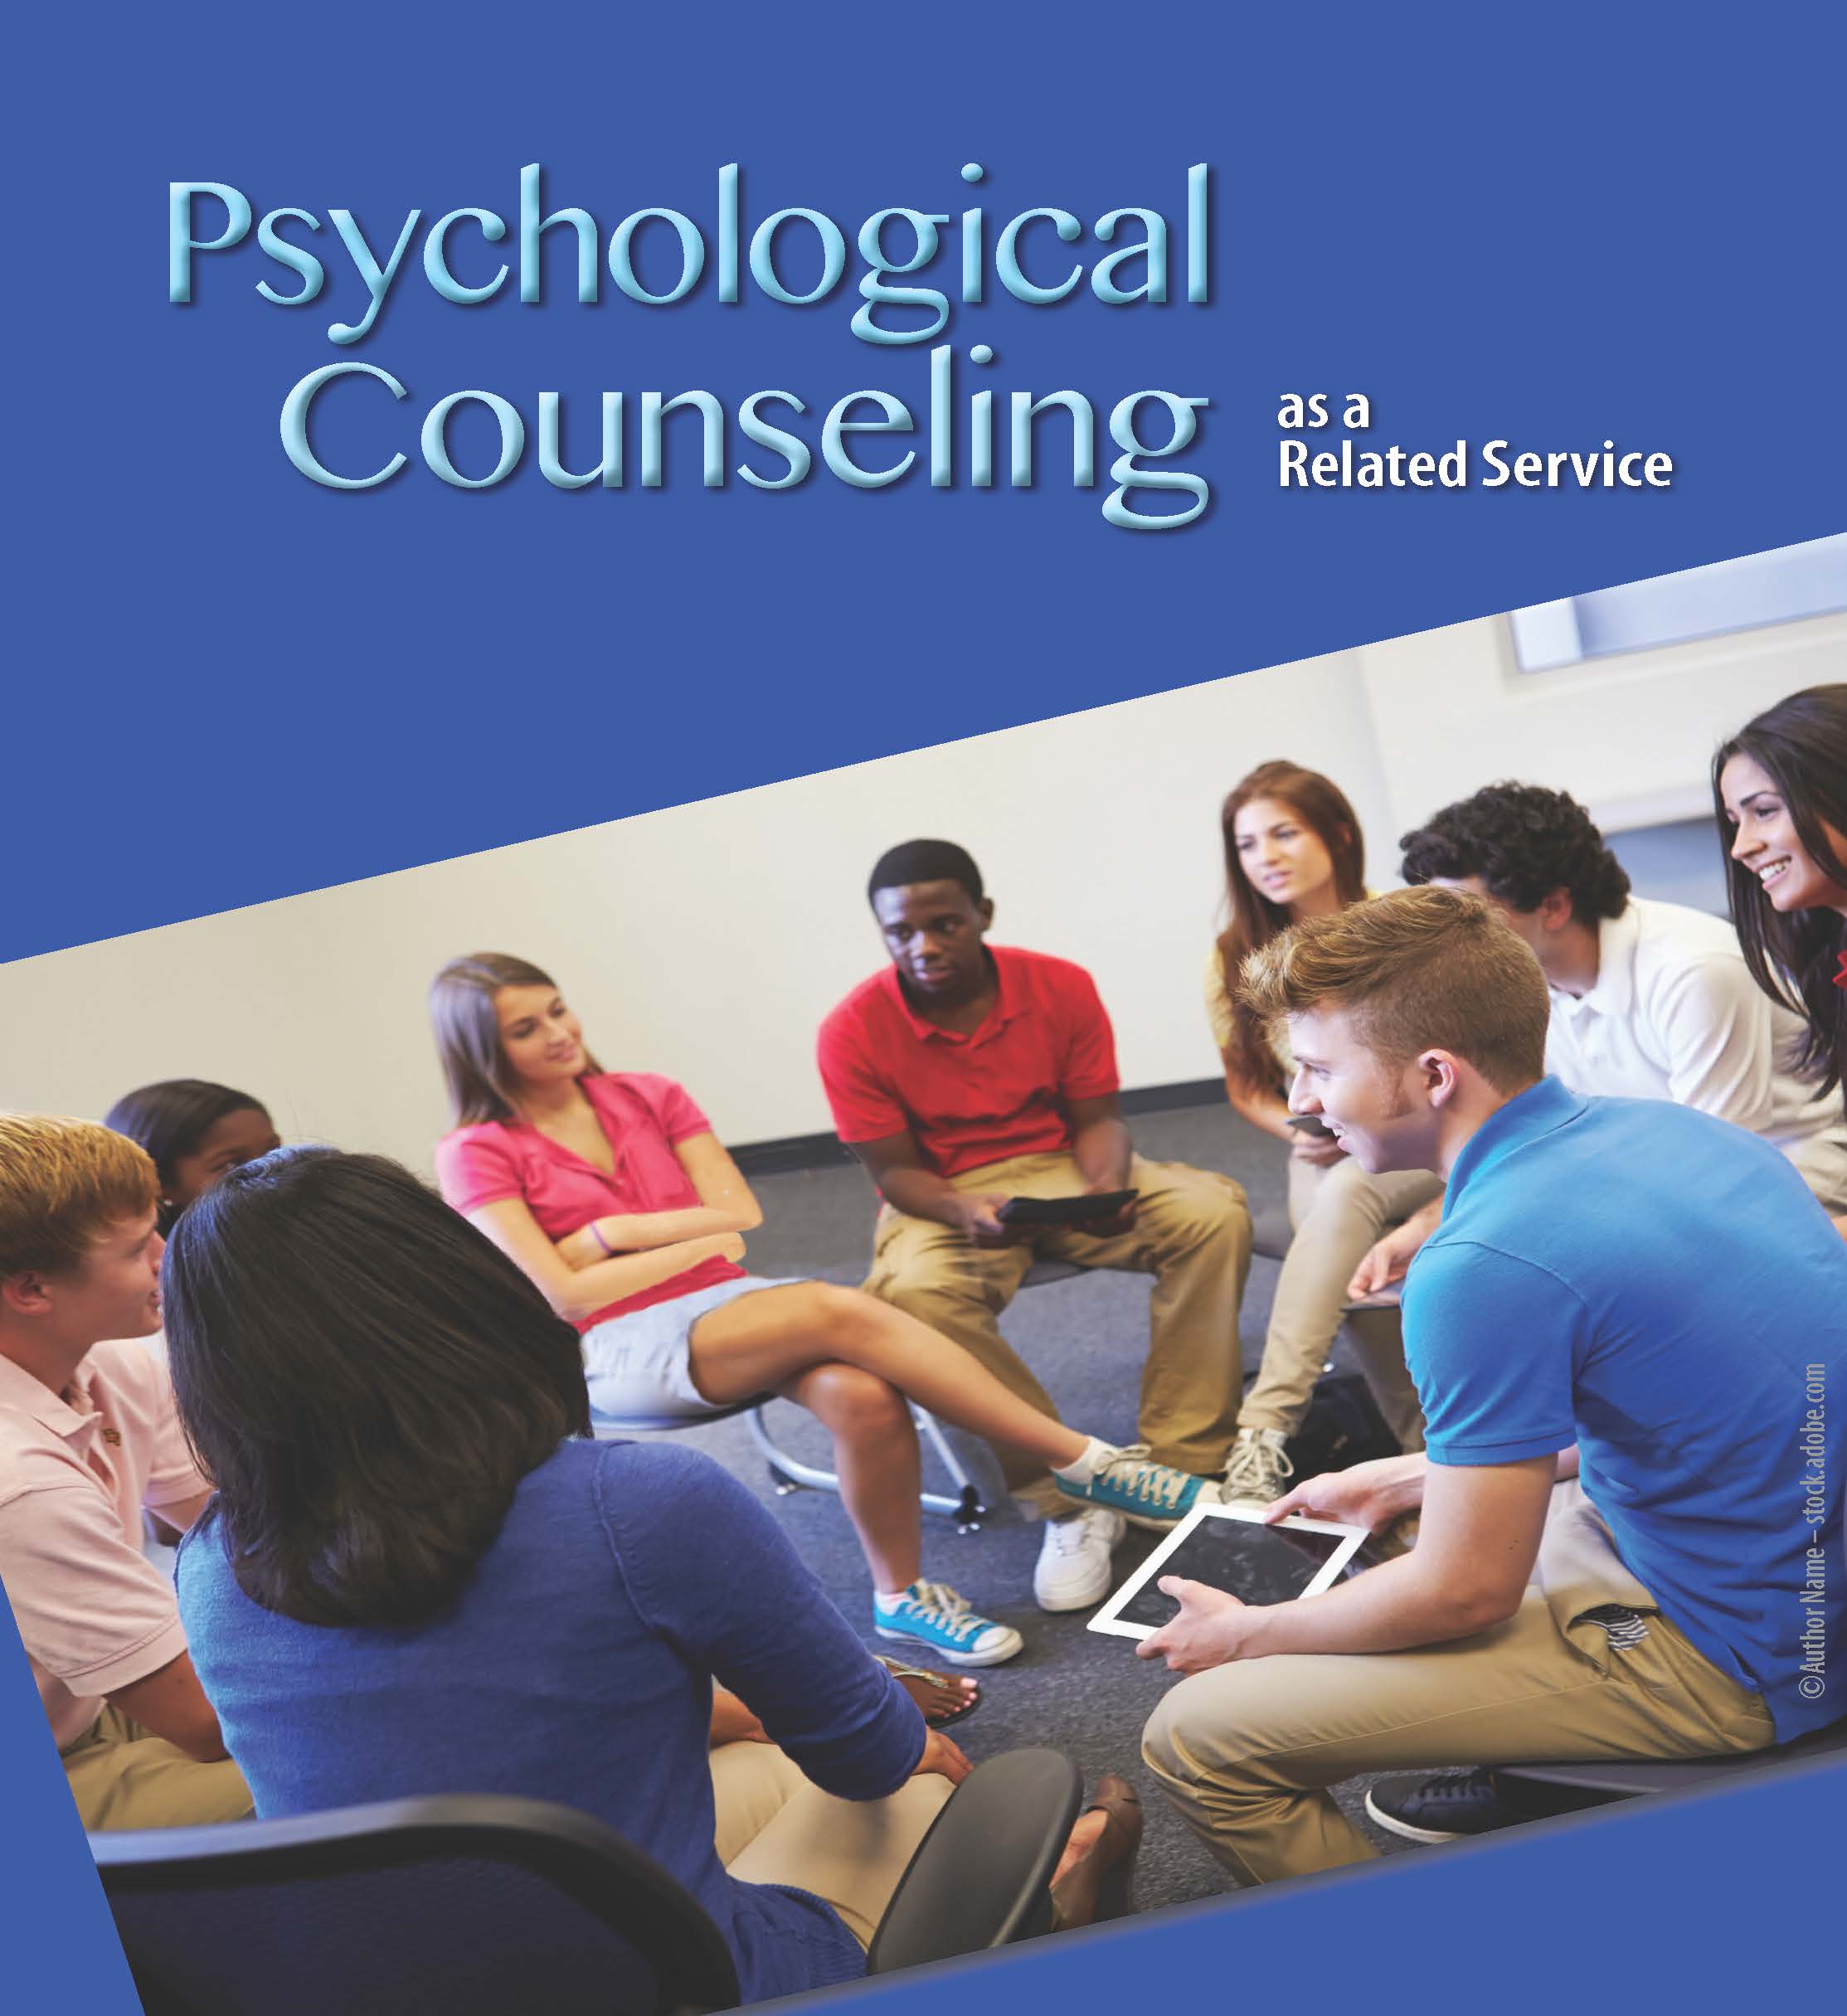 Psychological Counseling as a Related Service